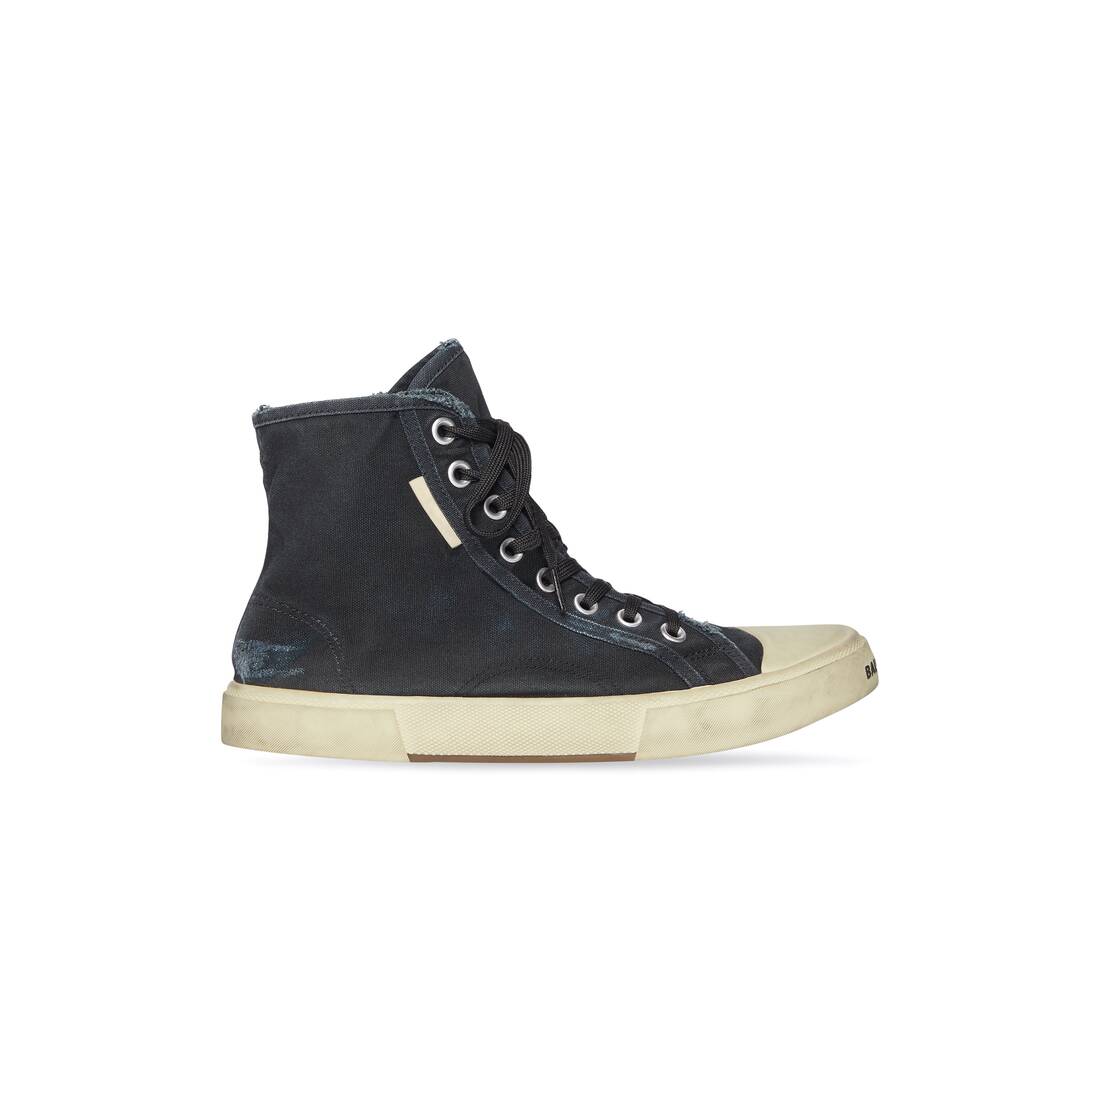 Paris High Top Sneaker in black destroyed cotton and white rubber